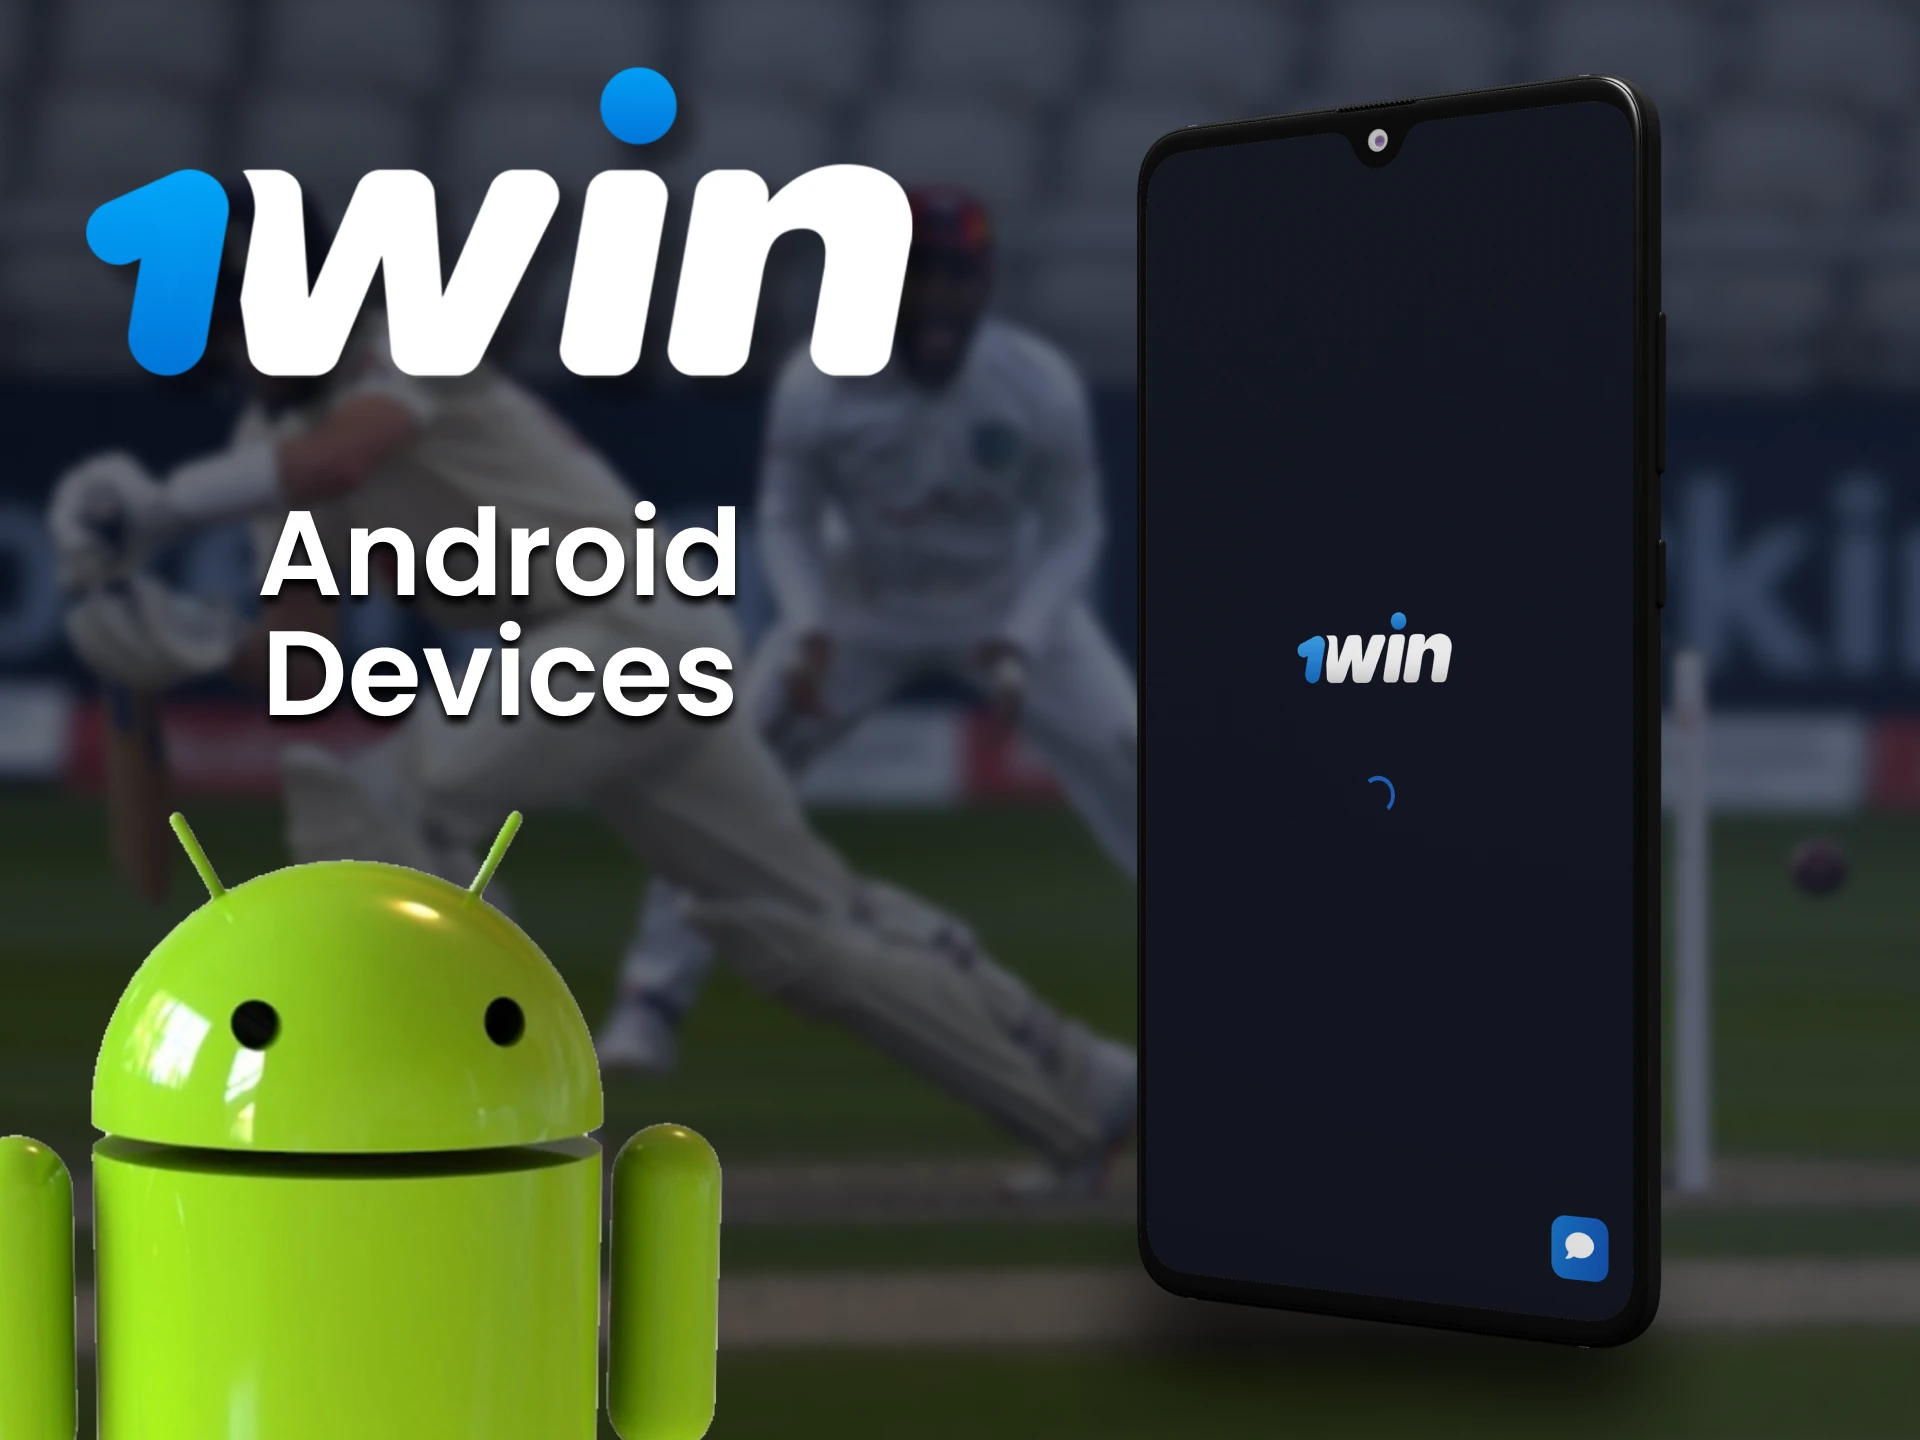 Android devices supported by the 1win app.